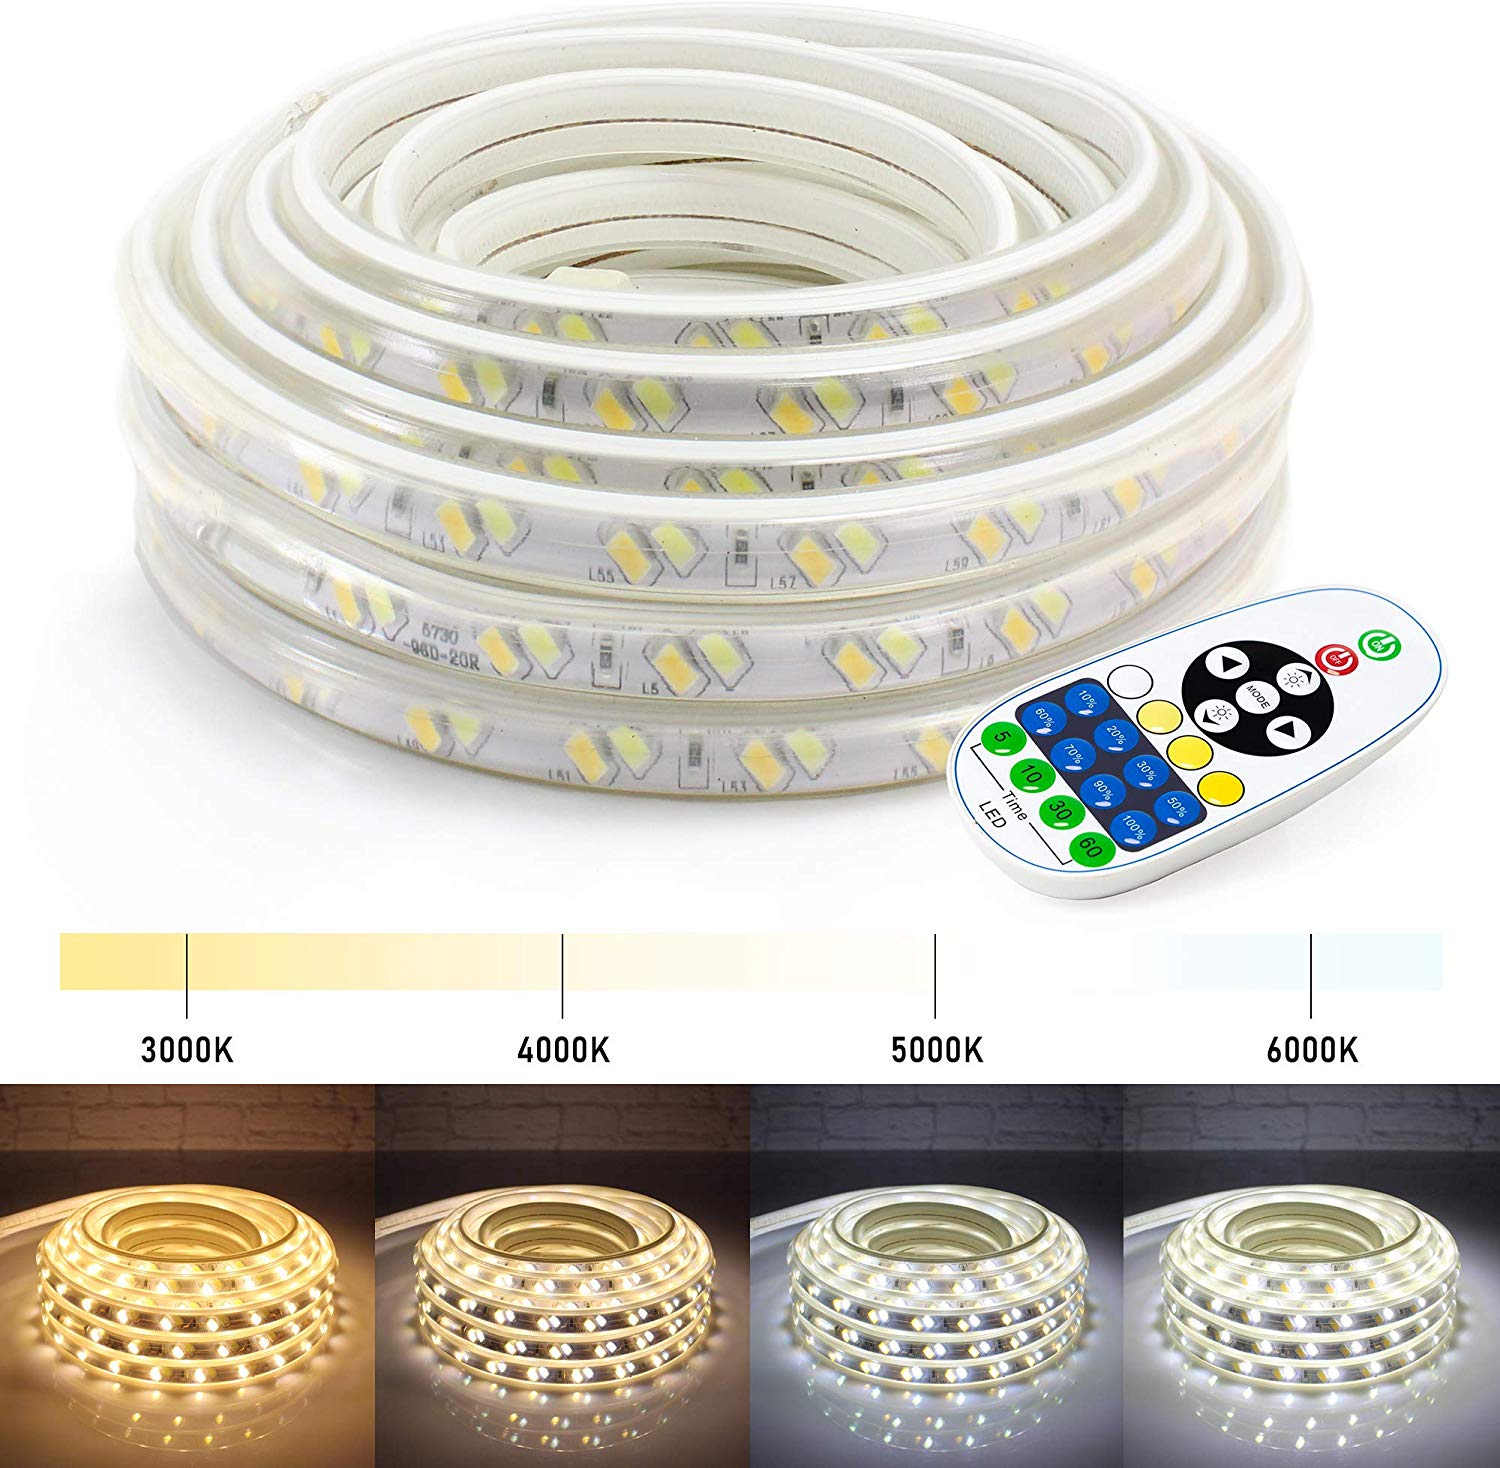 LED Strip Lights 2-in-1 Warm White & Cool White Flexible Dimmable